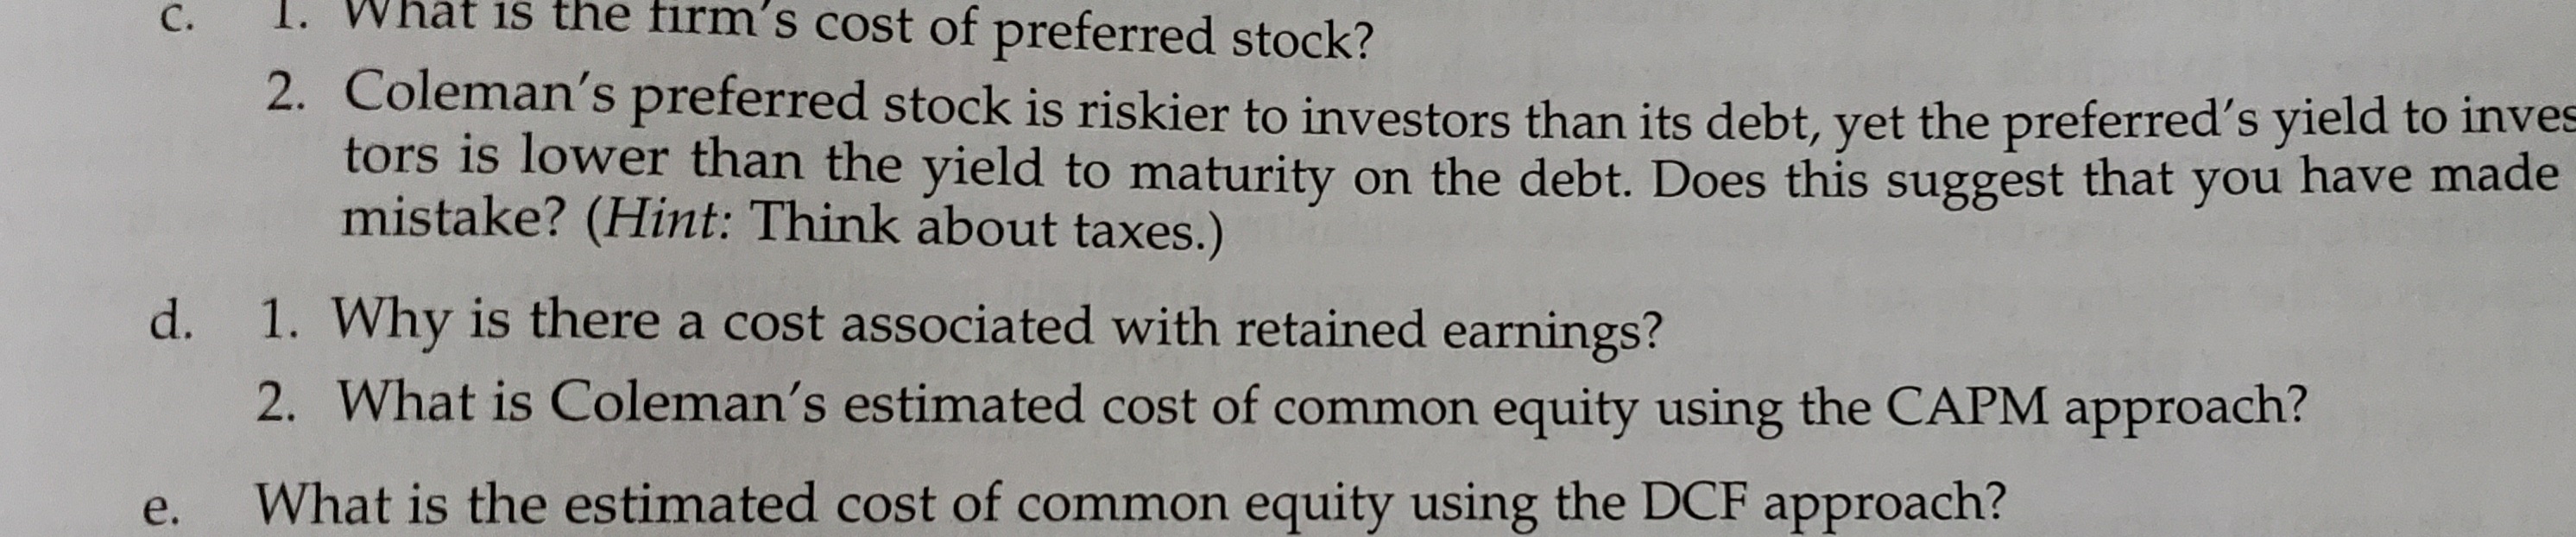 1. Why is there a cost associated with retained earnings?
2. What is Coleman's estimated cost of common equity using the CAPM approach?
d.
